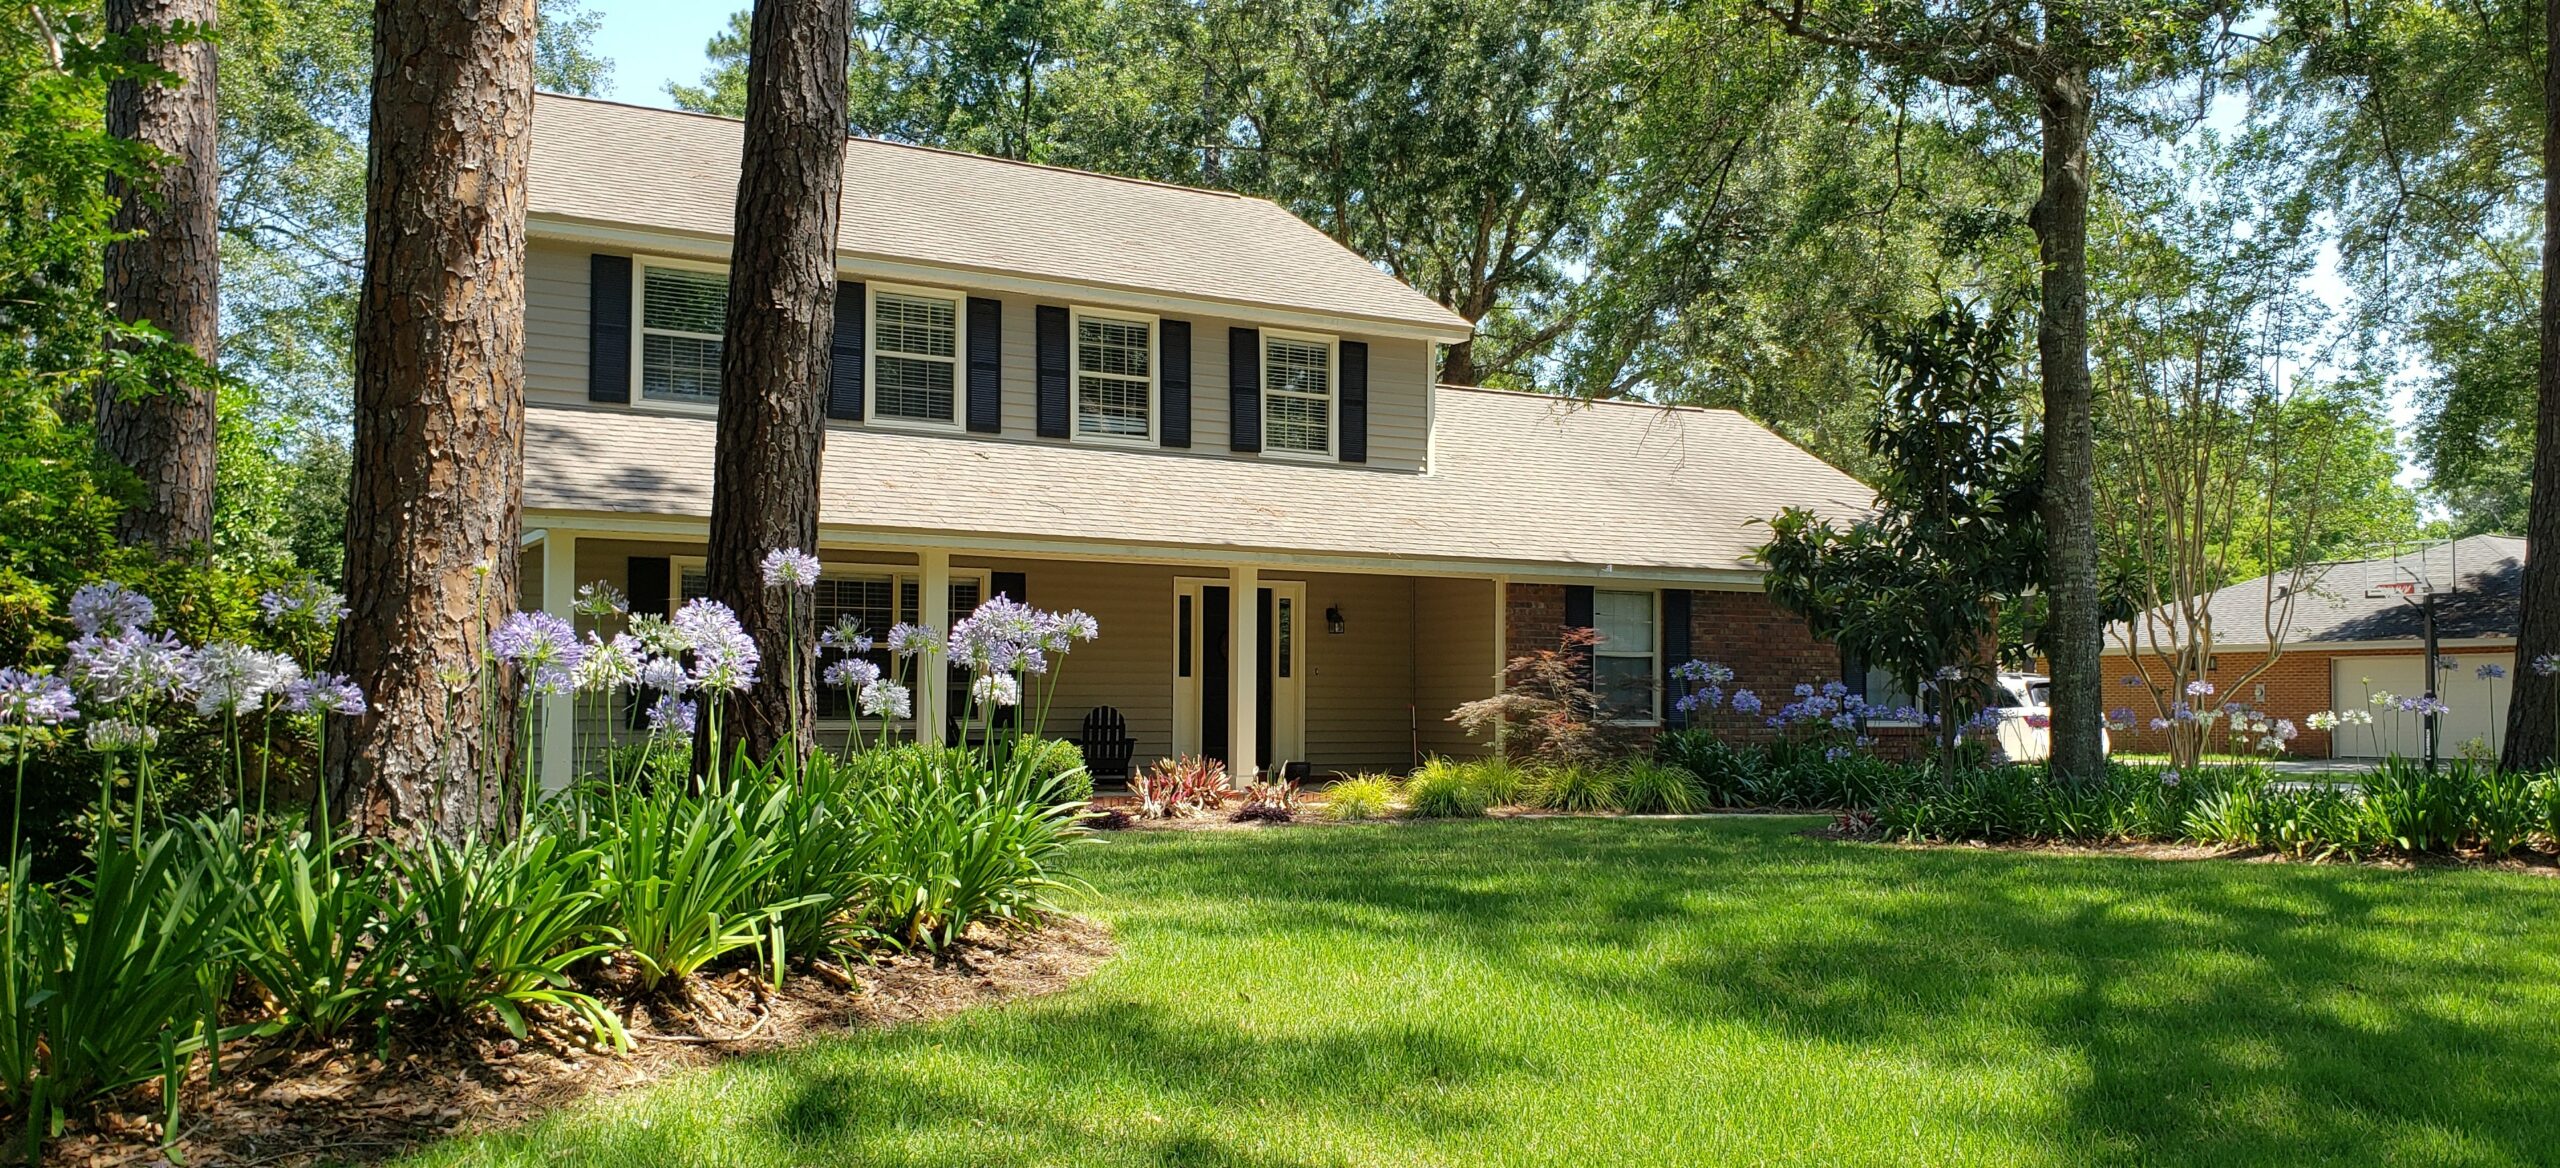 Picture of a home in Tallahassee Florida that is selling on the real estate market.